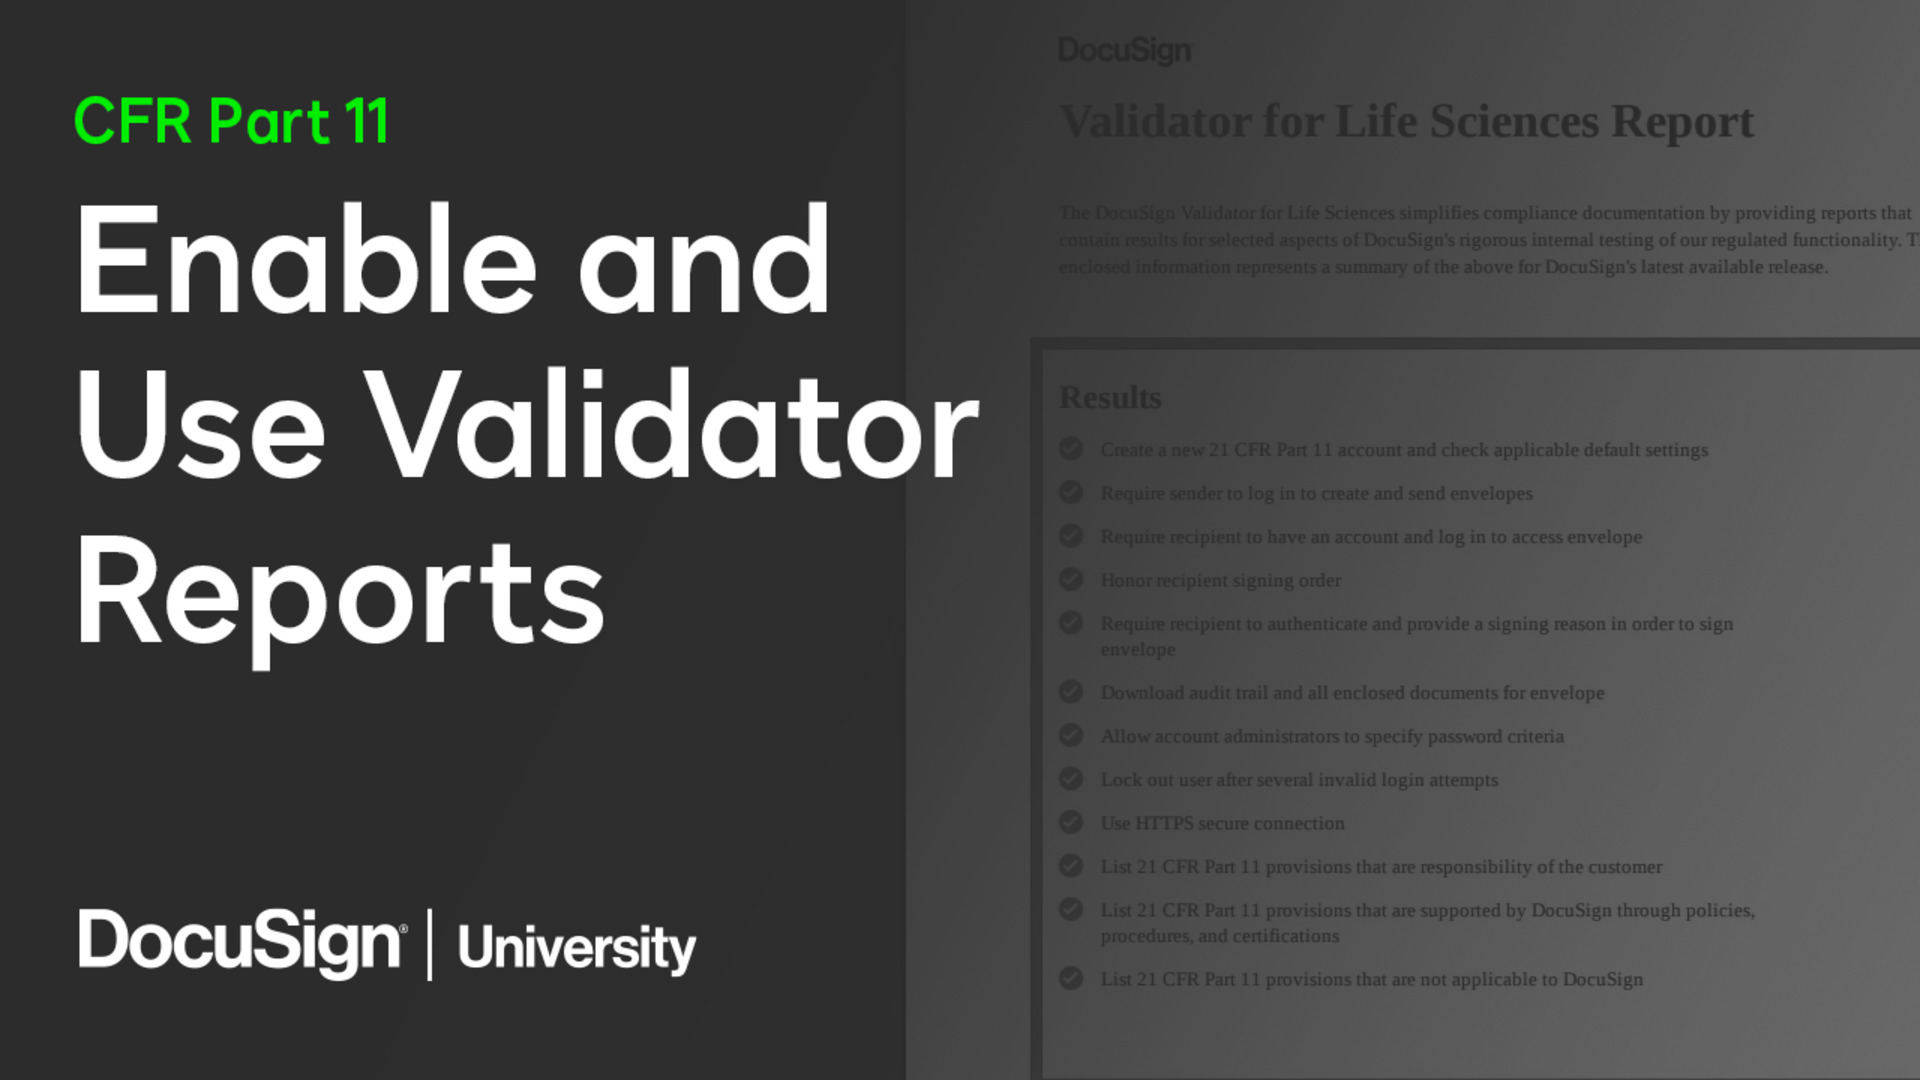 Video: DocuSign CFR Part 11 Module: Enable and Use Validator Reports